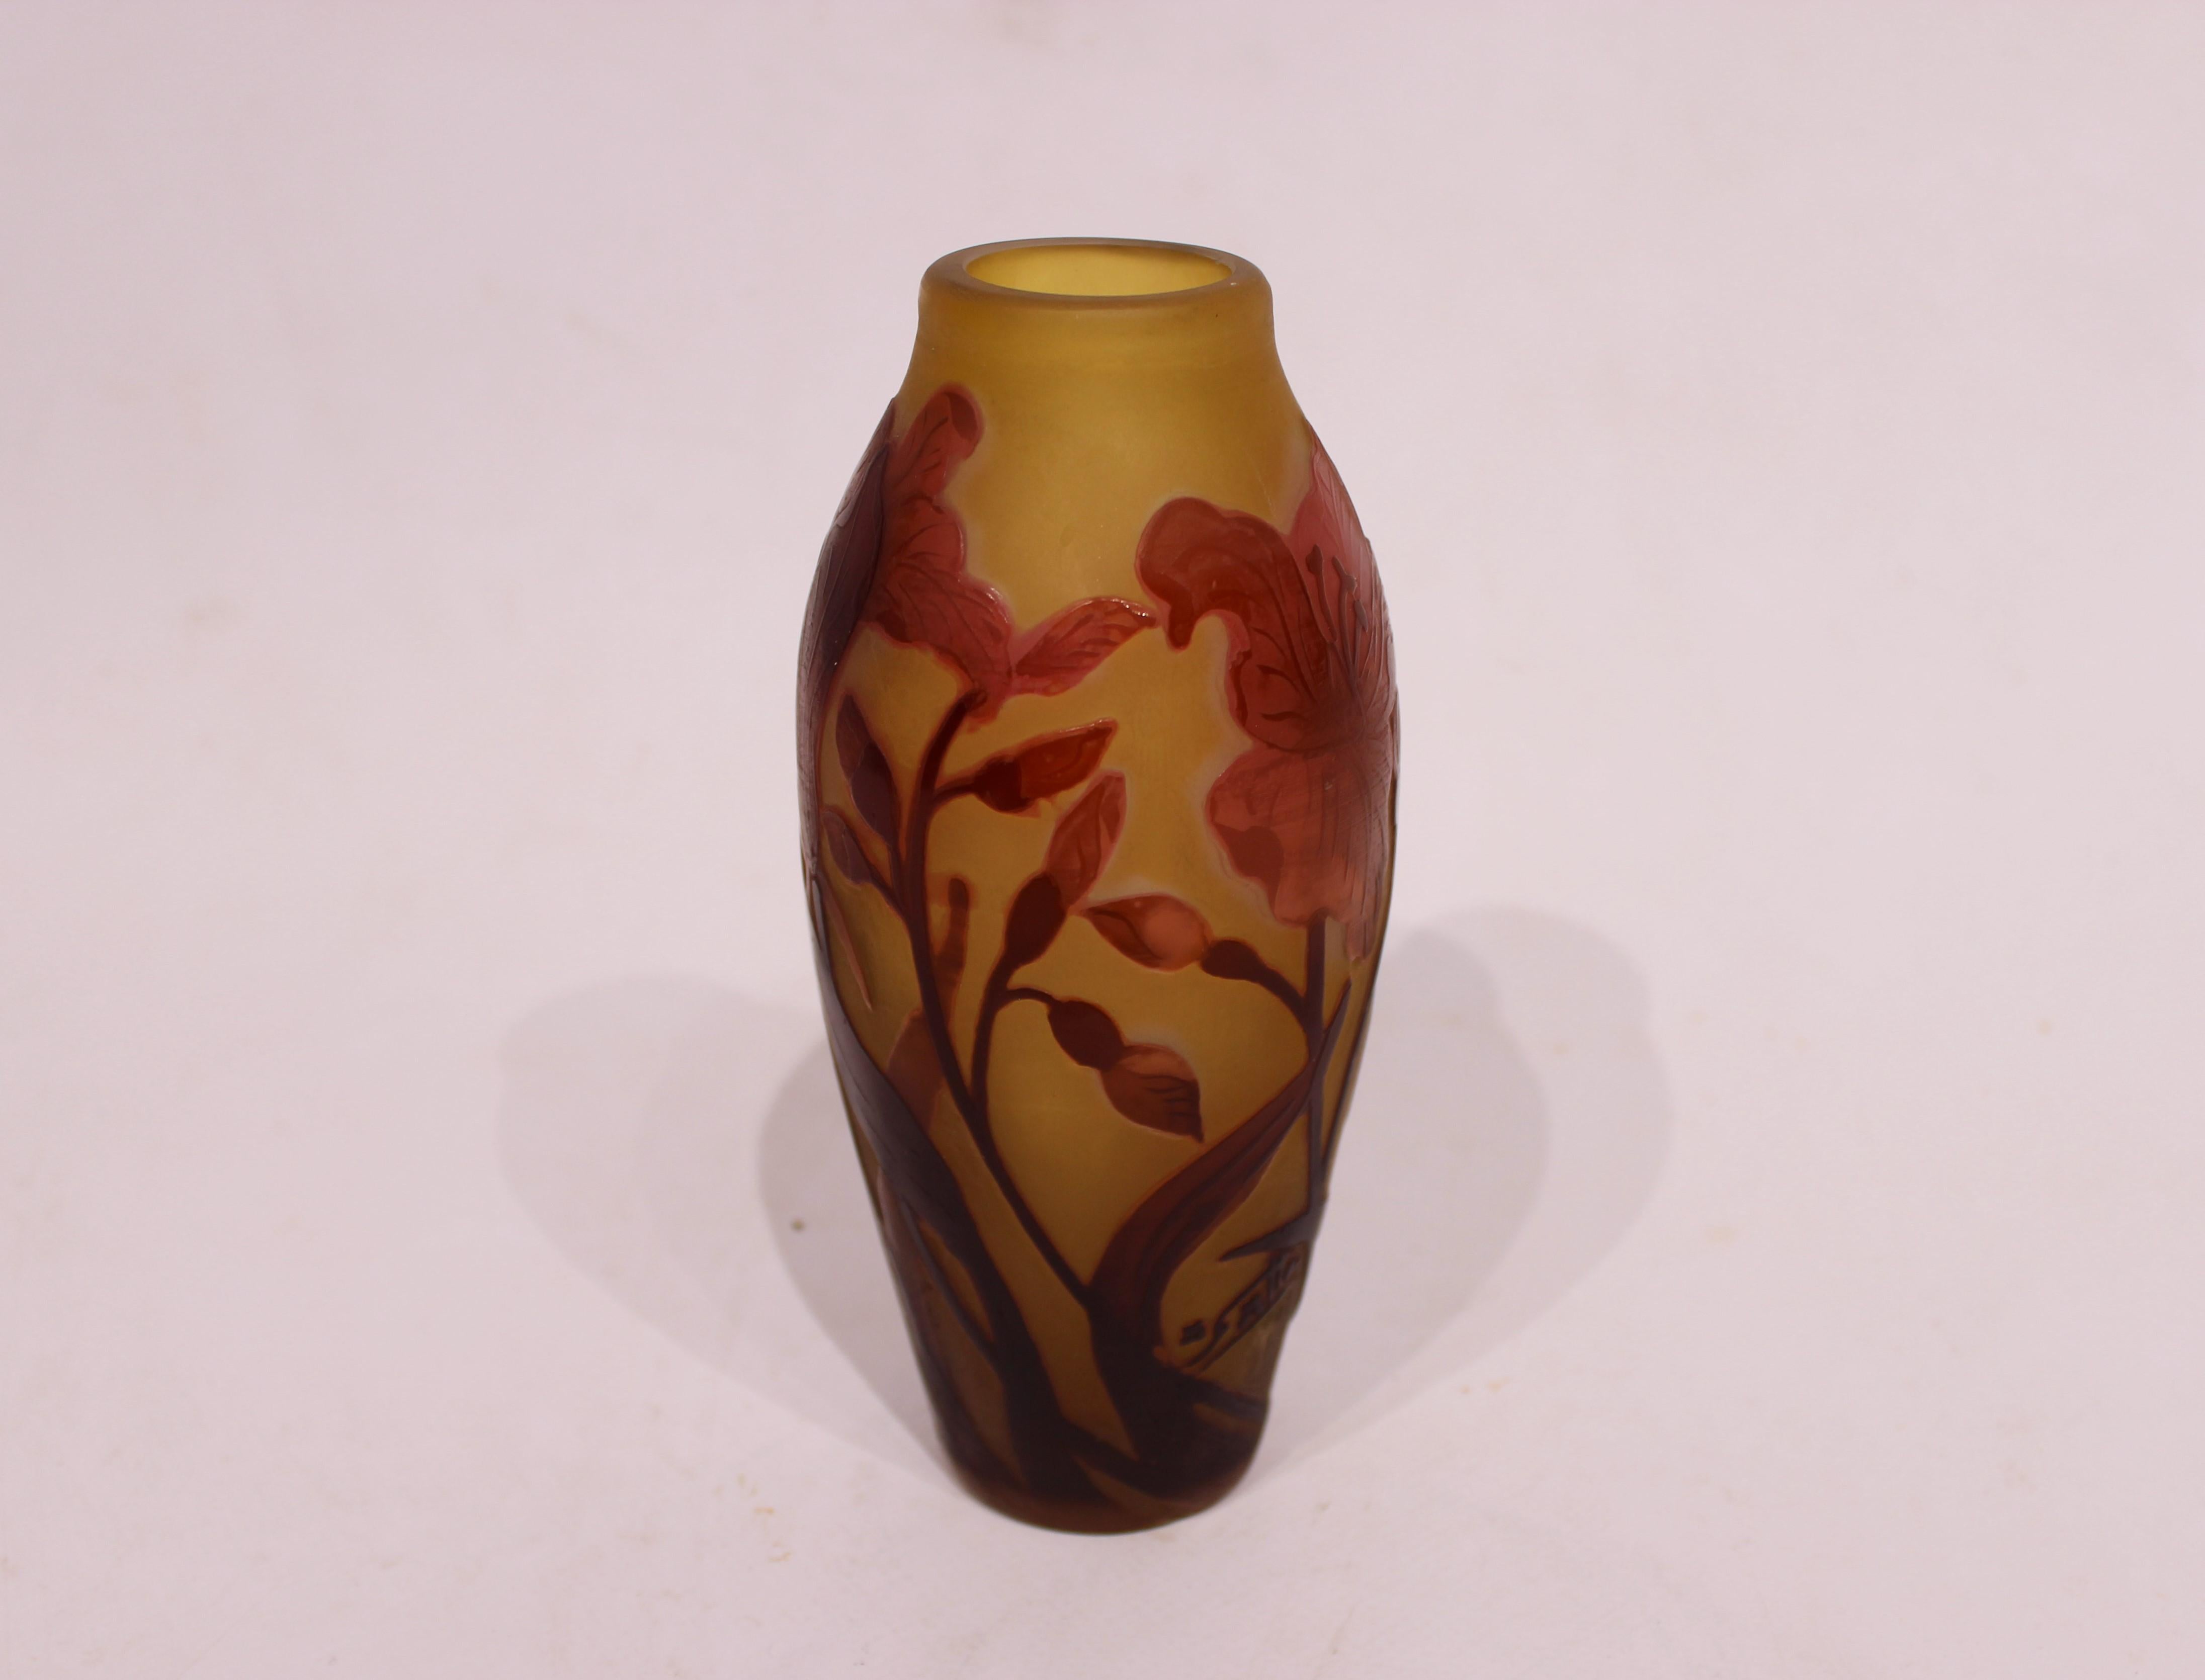 The Emile Gallé glass vase from France, beautifully decorated in dark colors and dating back to the circa 1900s, is a remarkable and exquisite example of Art Nouveau glasswork.

Emile Gallé was a renowned French artist and glassmaker, known for his